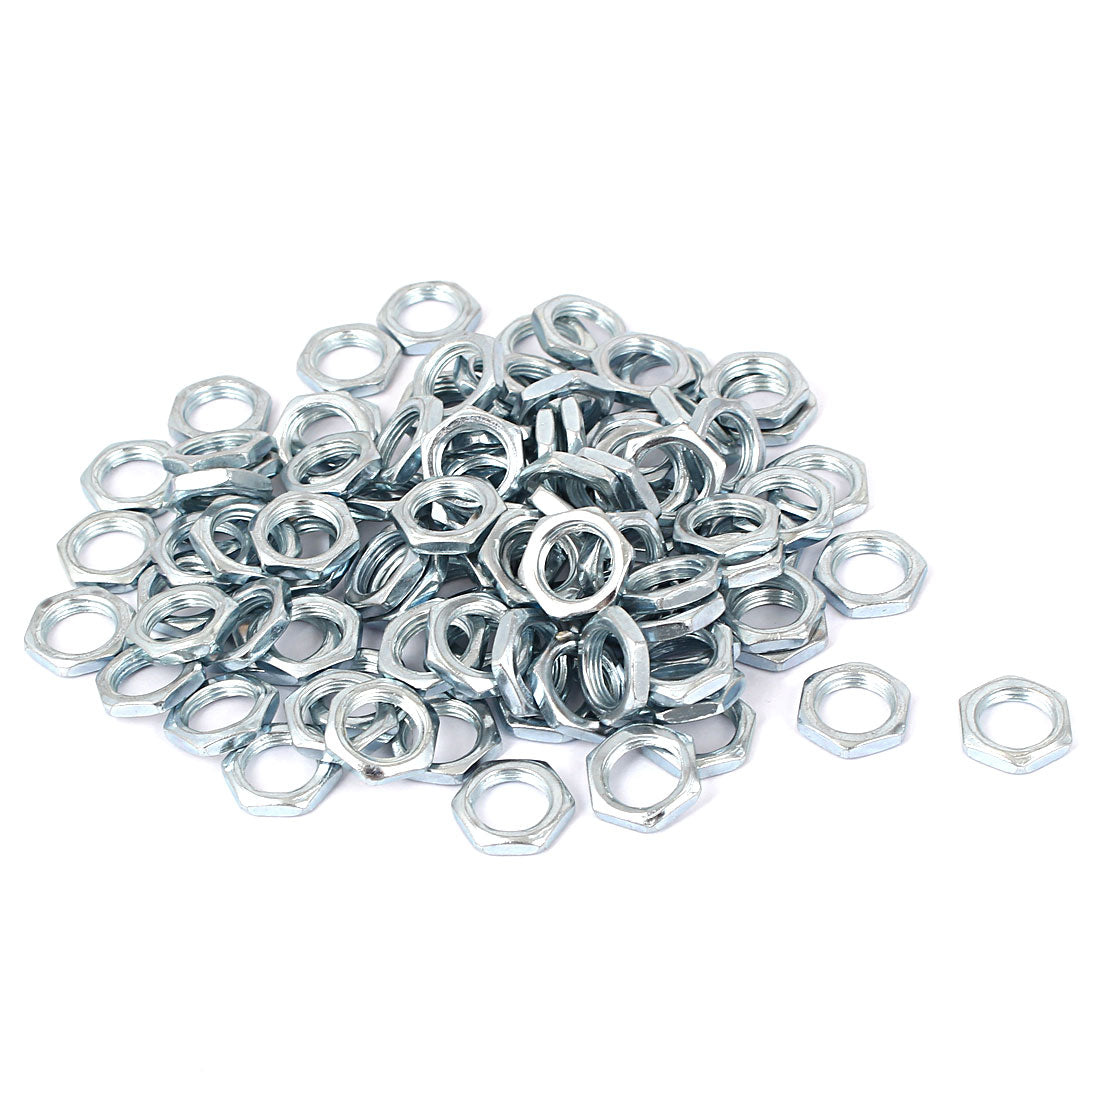 uxcell Uxcell M10x0.75x3mm Zinc Plated Hex Nuts Fastener 100pcs for Screws Bolts